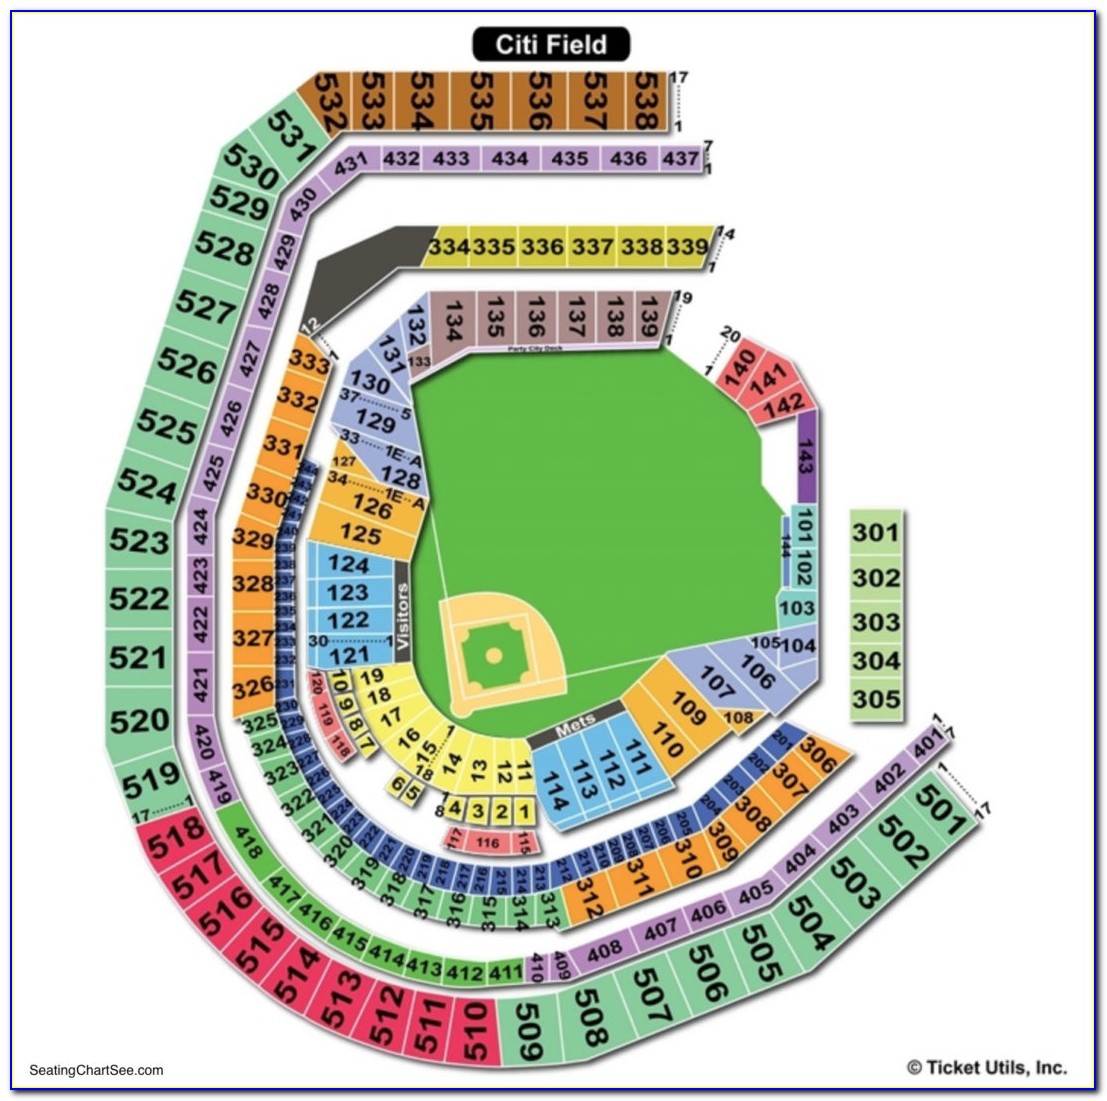 Citi Field Seating Chart For Concerts